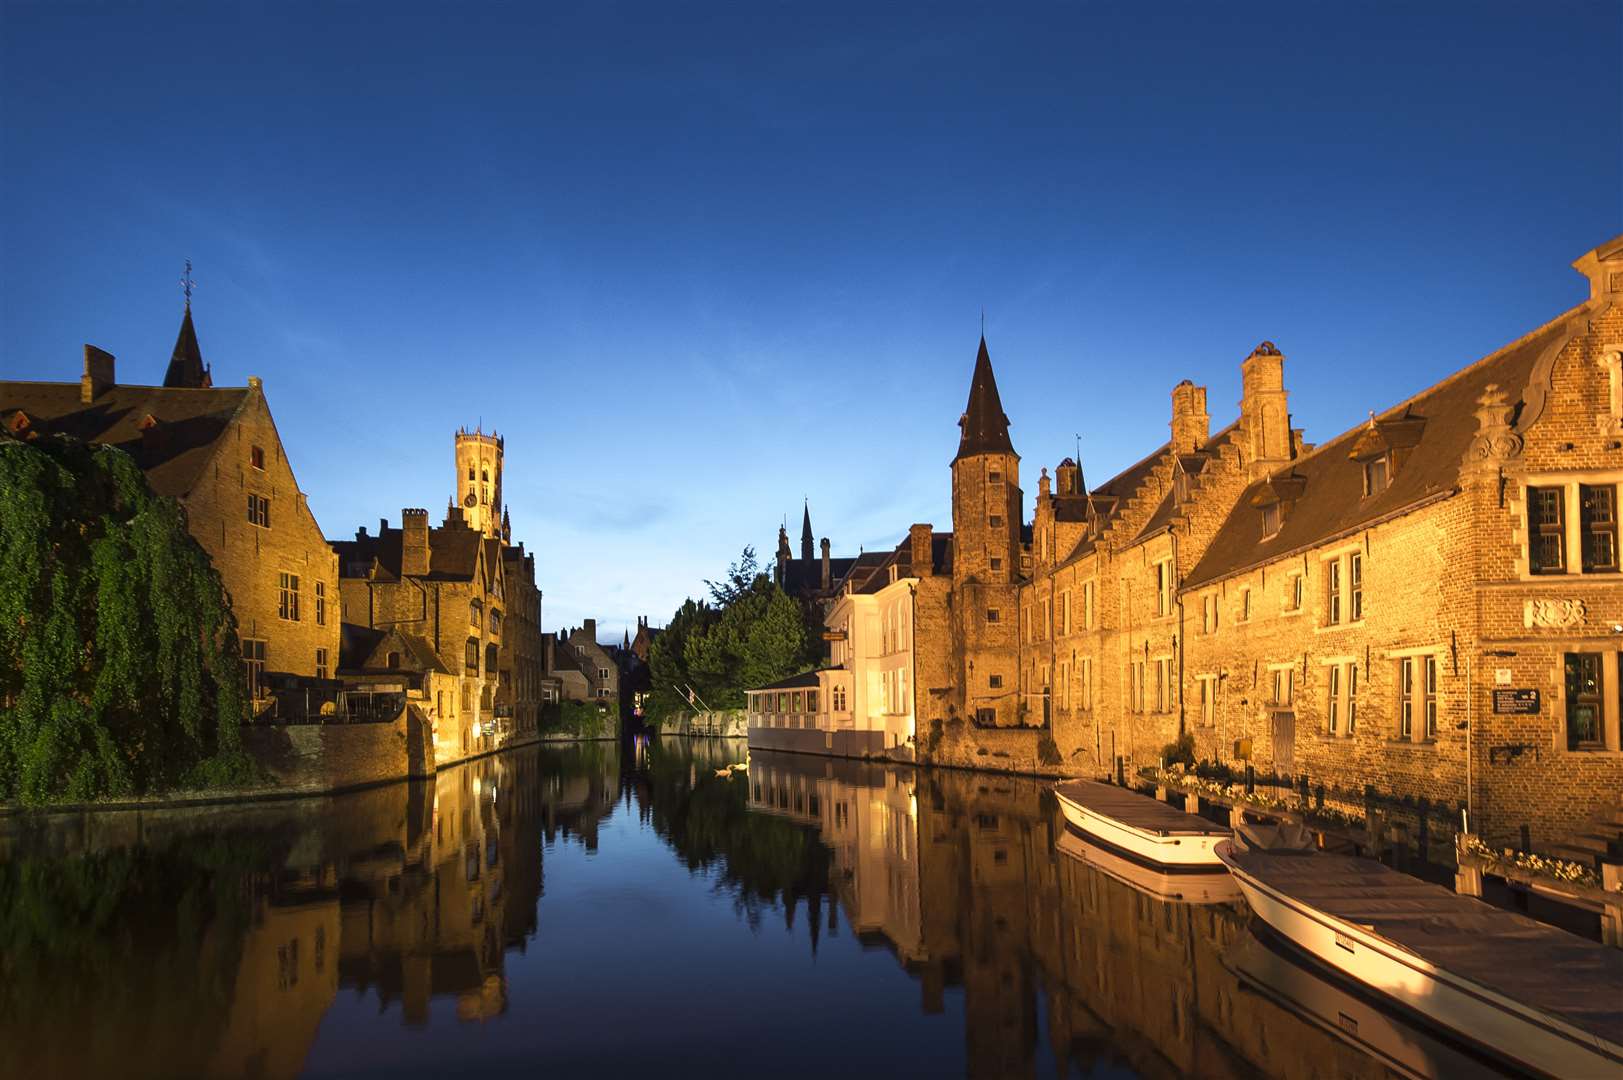 Bruges, in Belgium, is one of the cities keen to see its tourism industry kick-started